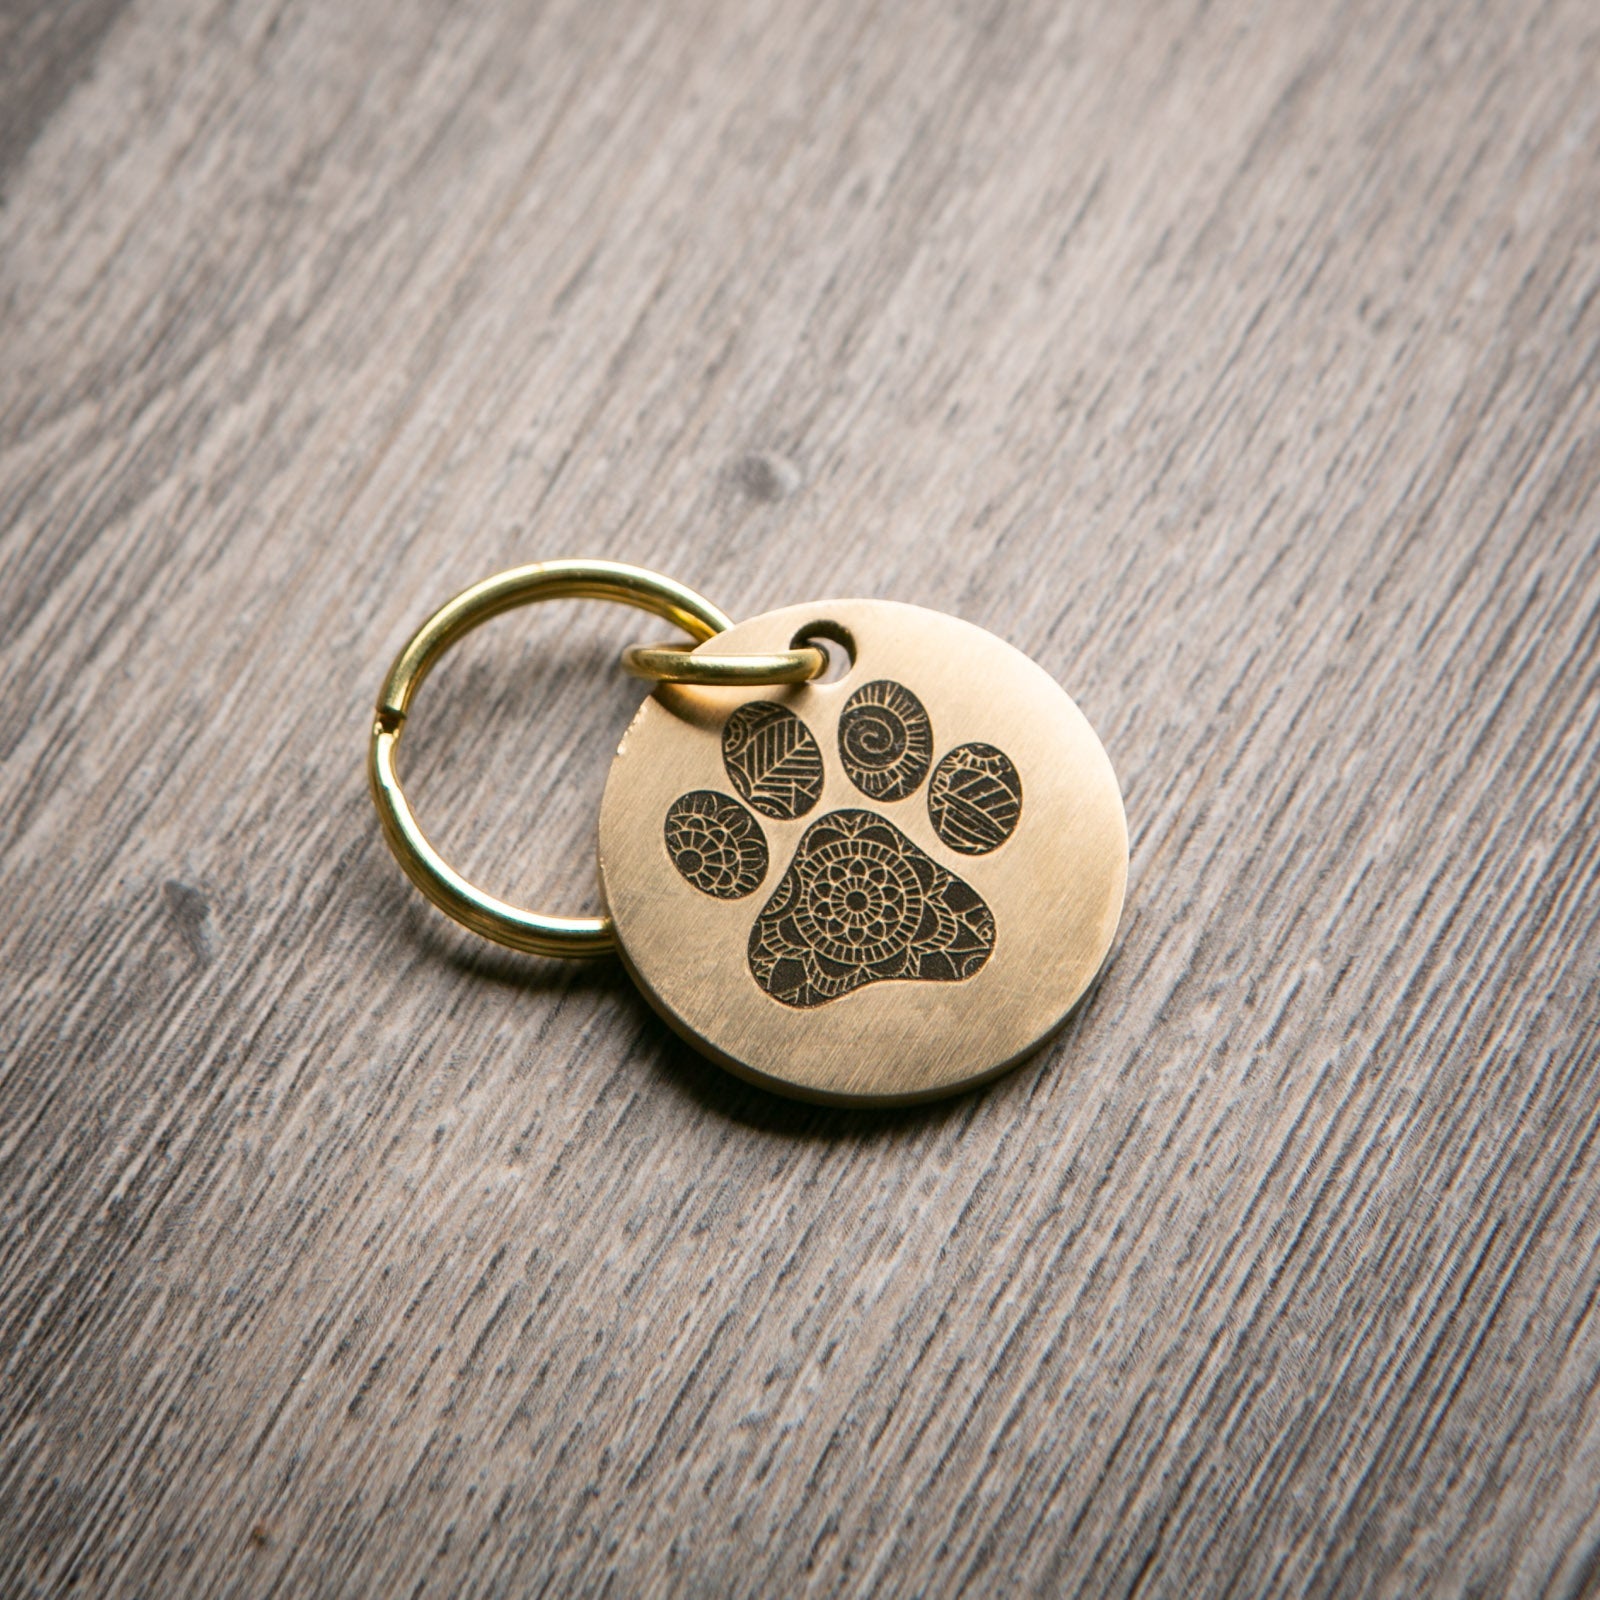 Personalized Brass Pet Tag - Round - Etchified-Etchified-PT-RND-L